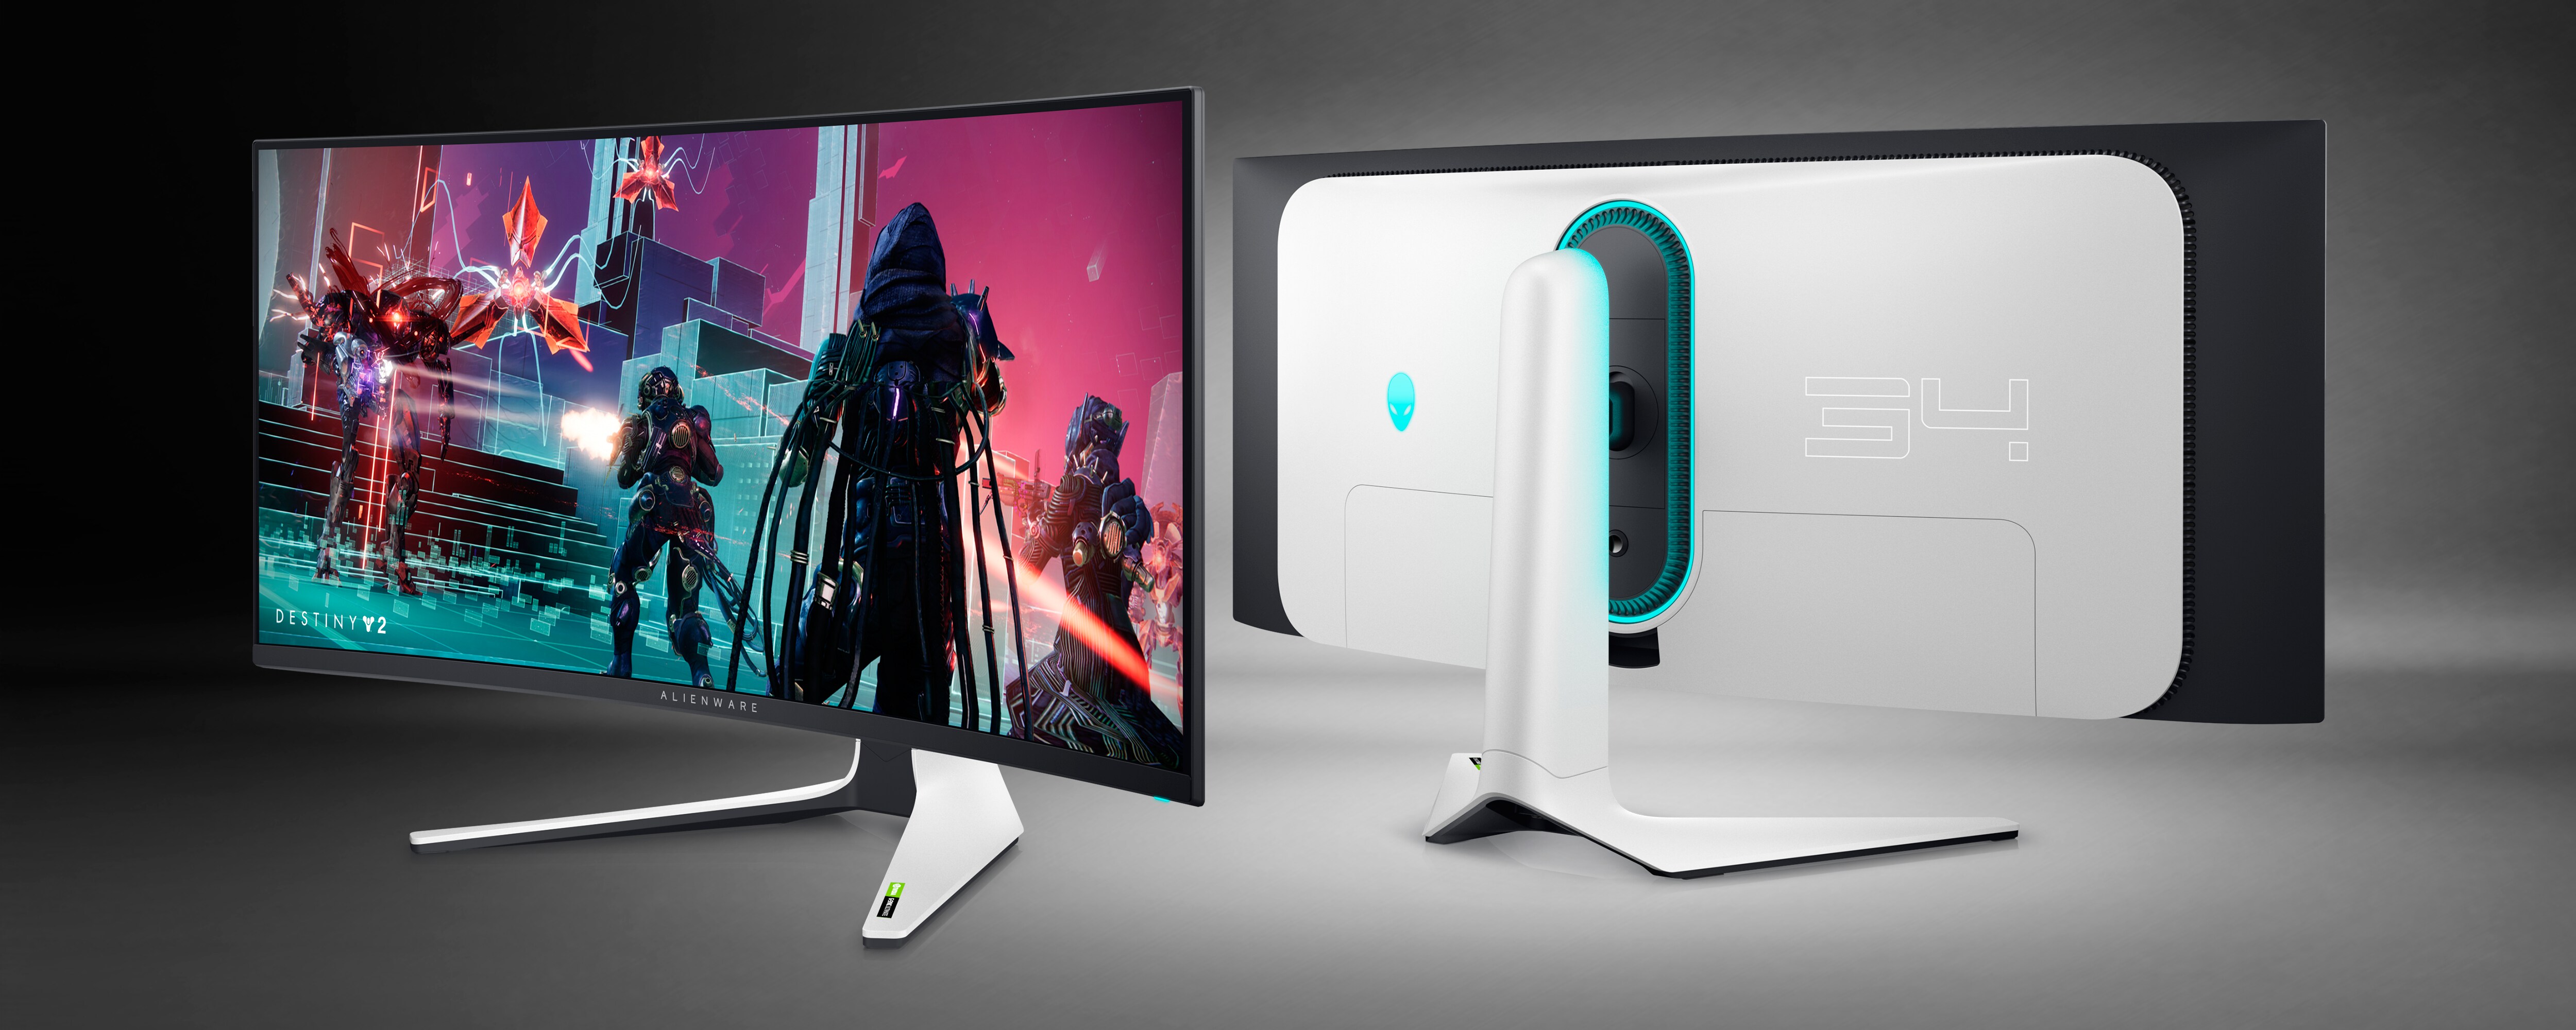 Alienware 34 Inch Curved QD-OLED Gaming Monitor - AW3423DW | Dell USA